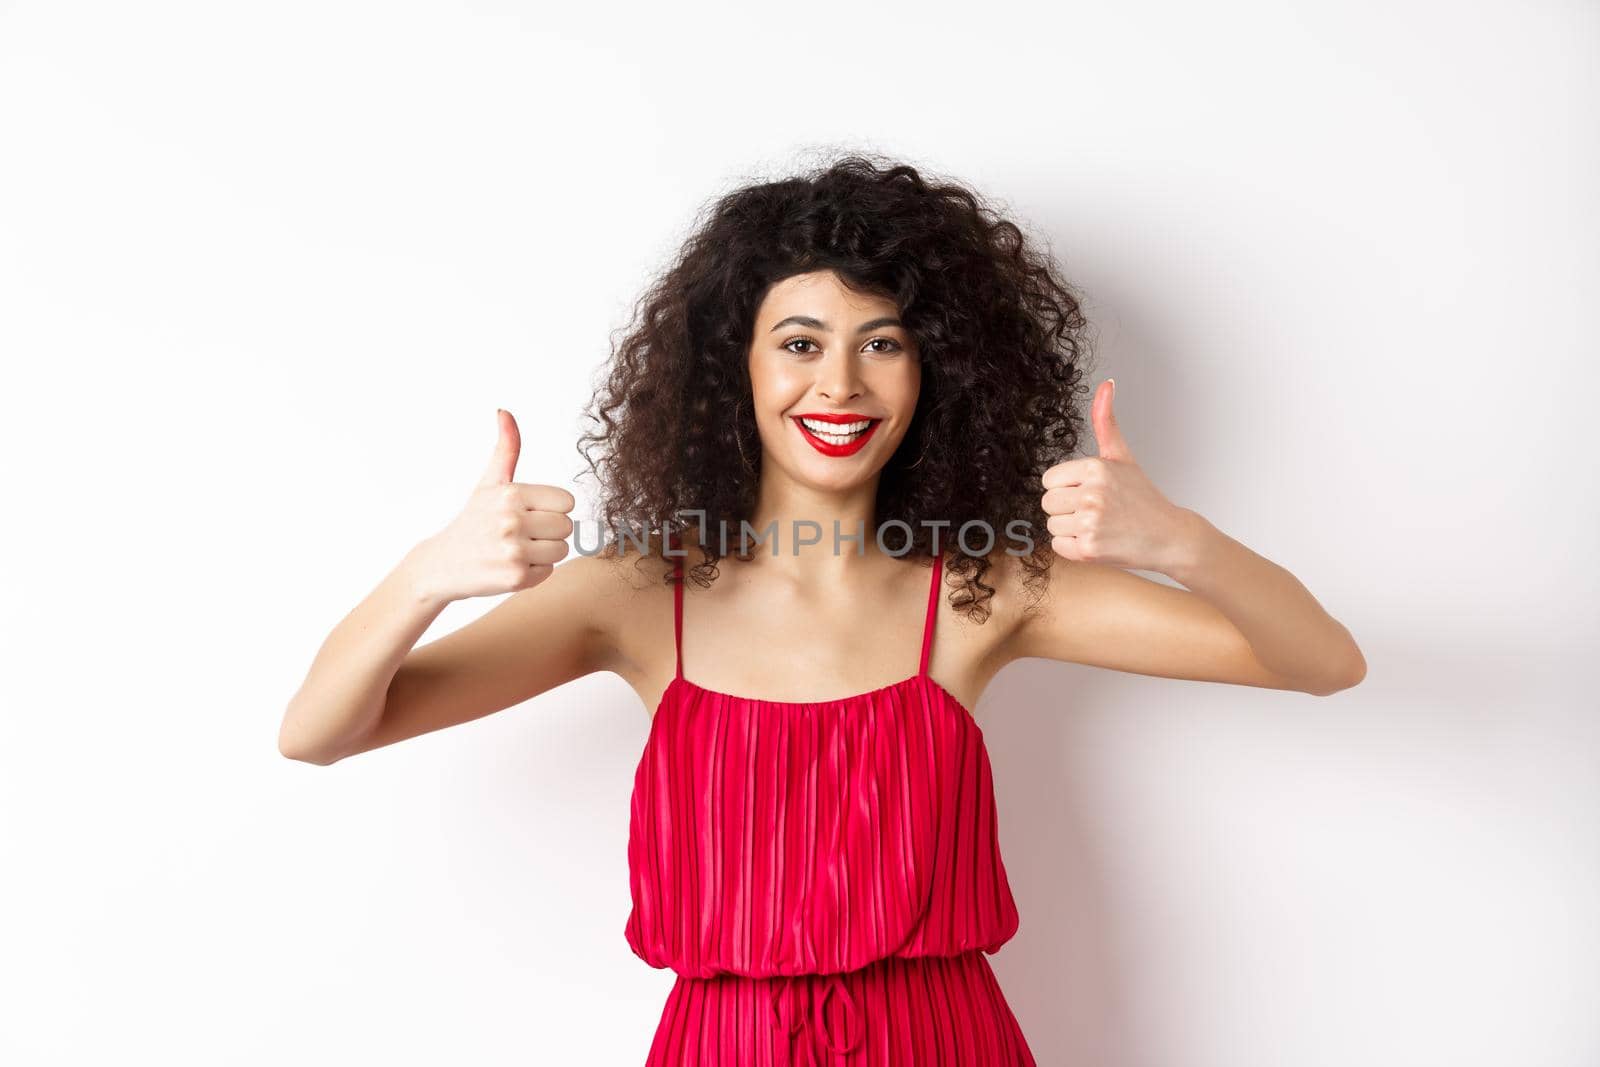 Attractive young woman recommending promo offer, showing thumb up and smiling, like product, standing in festive red dress on white background.